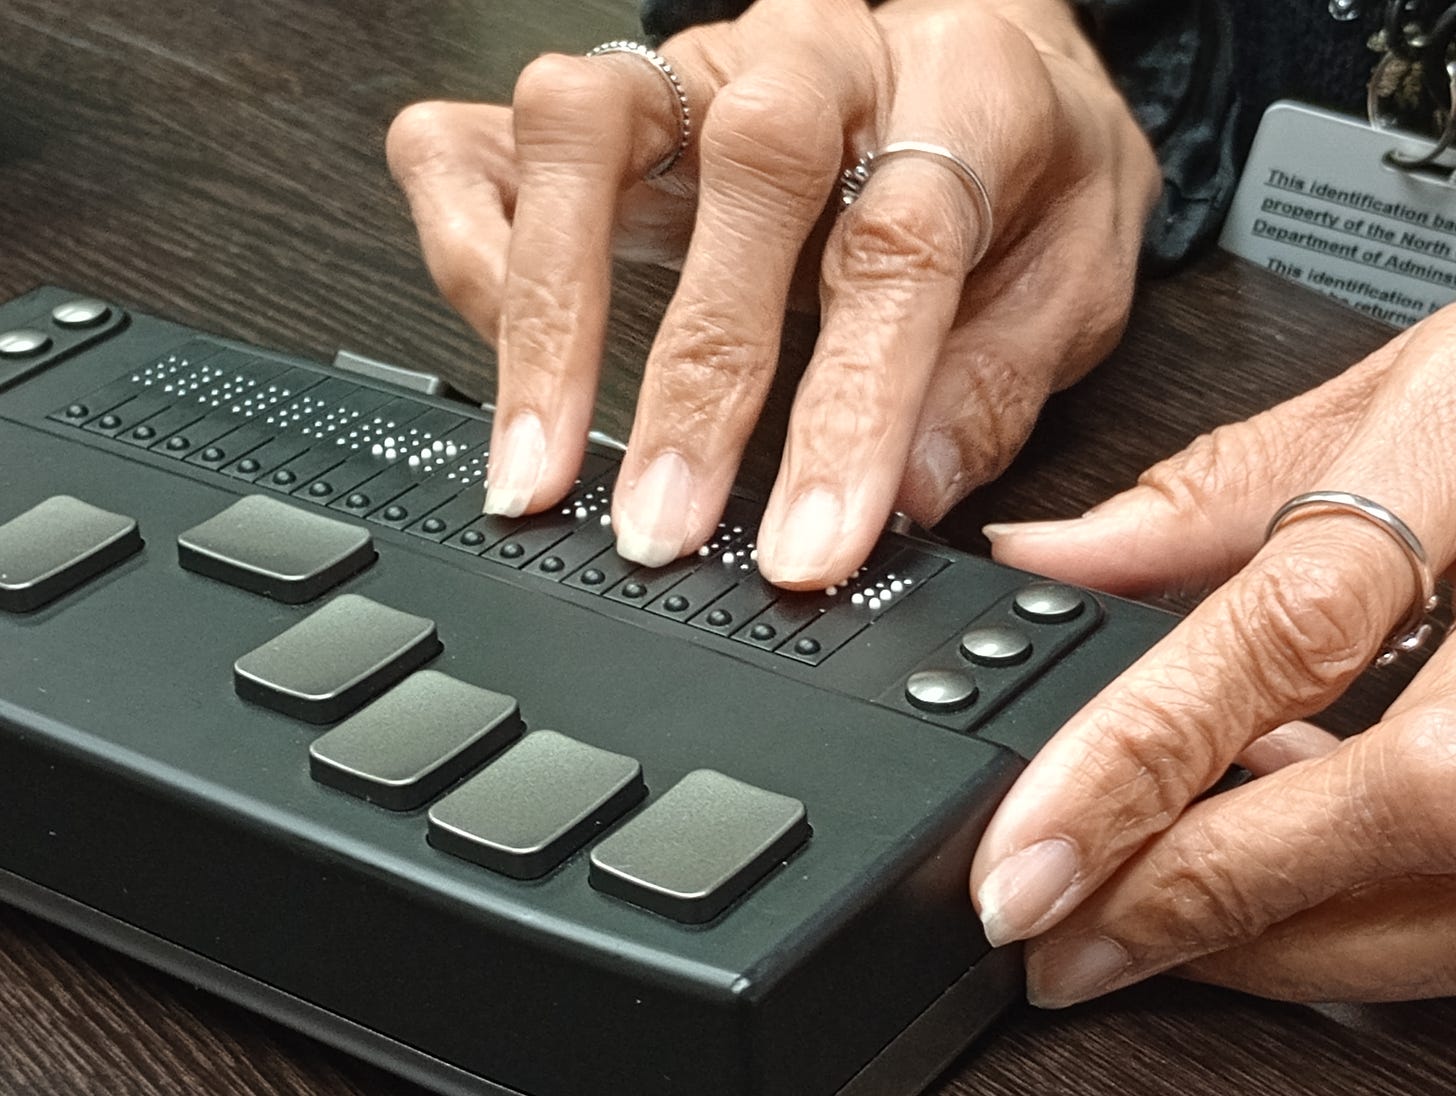 A closeup of a person's hands using a Braille eReader, a small portable electronic reading device for braille users.